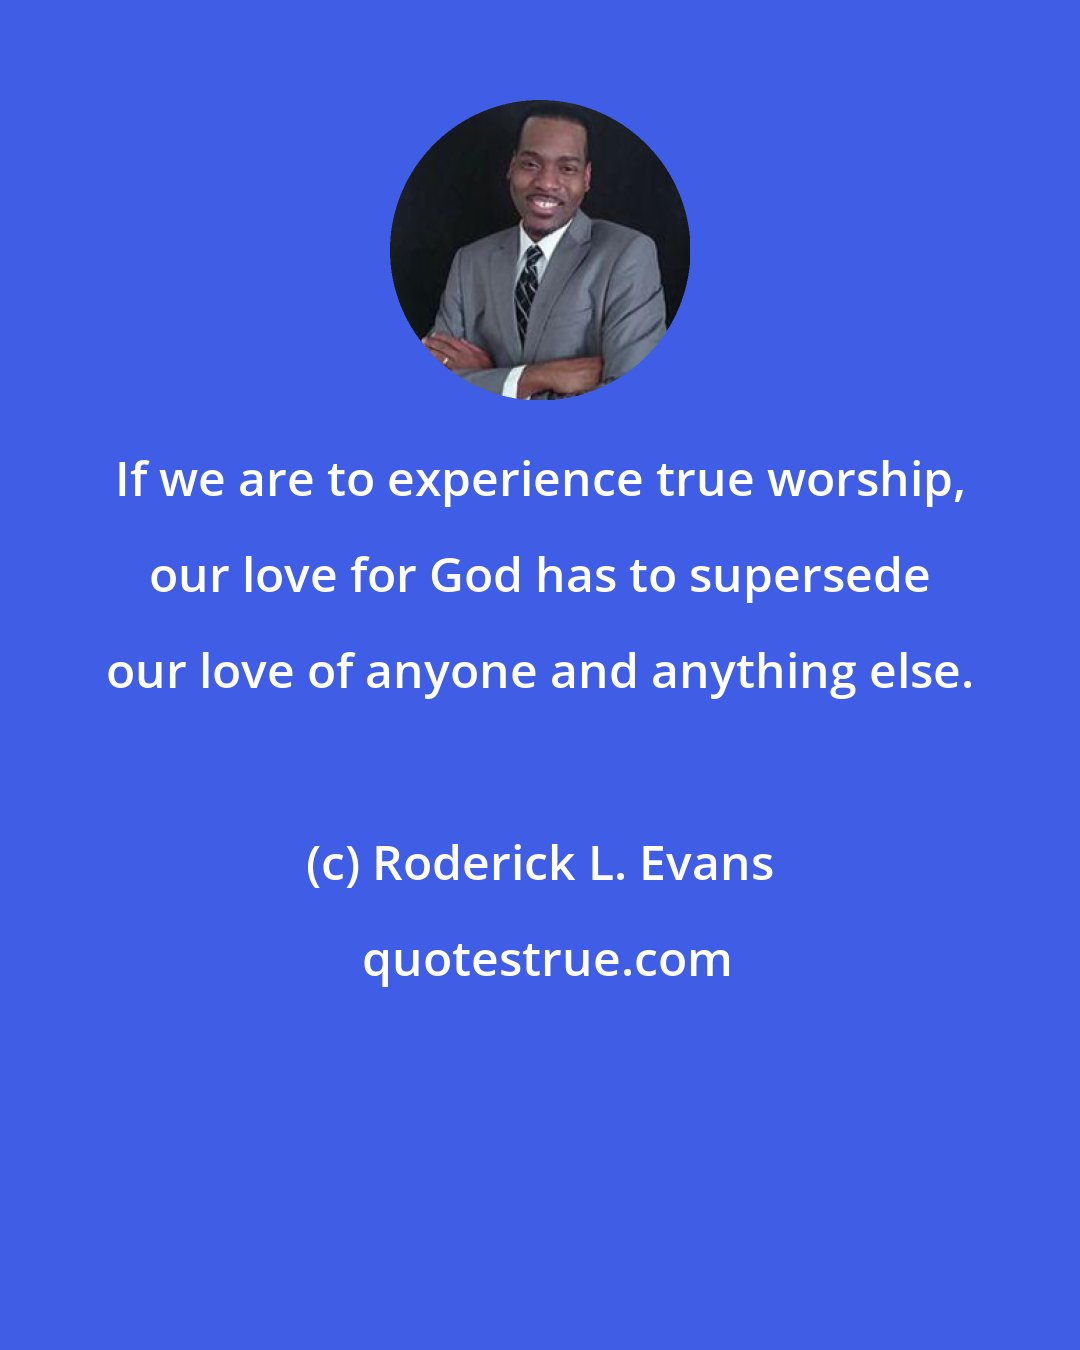 Roderick L. Evans: If we are to experience true worship, our love for God has to supersede our love of anyone and anything else.